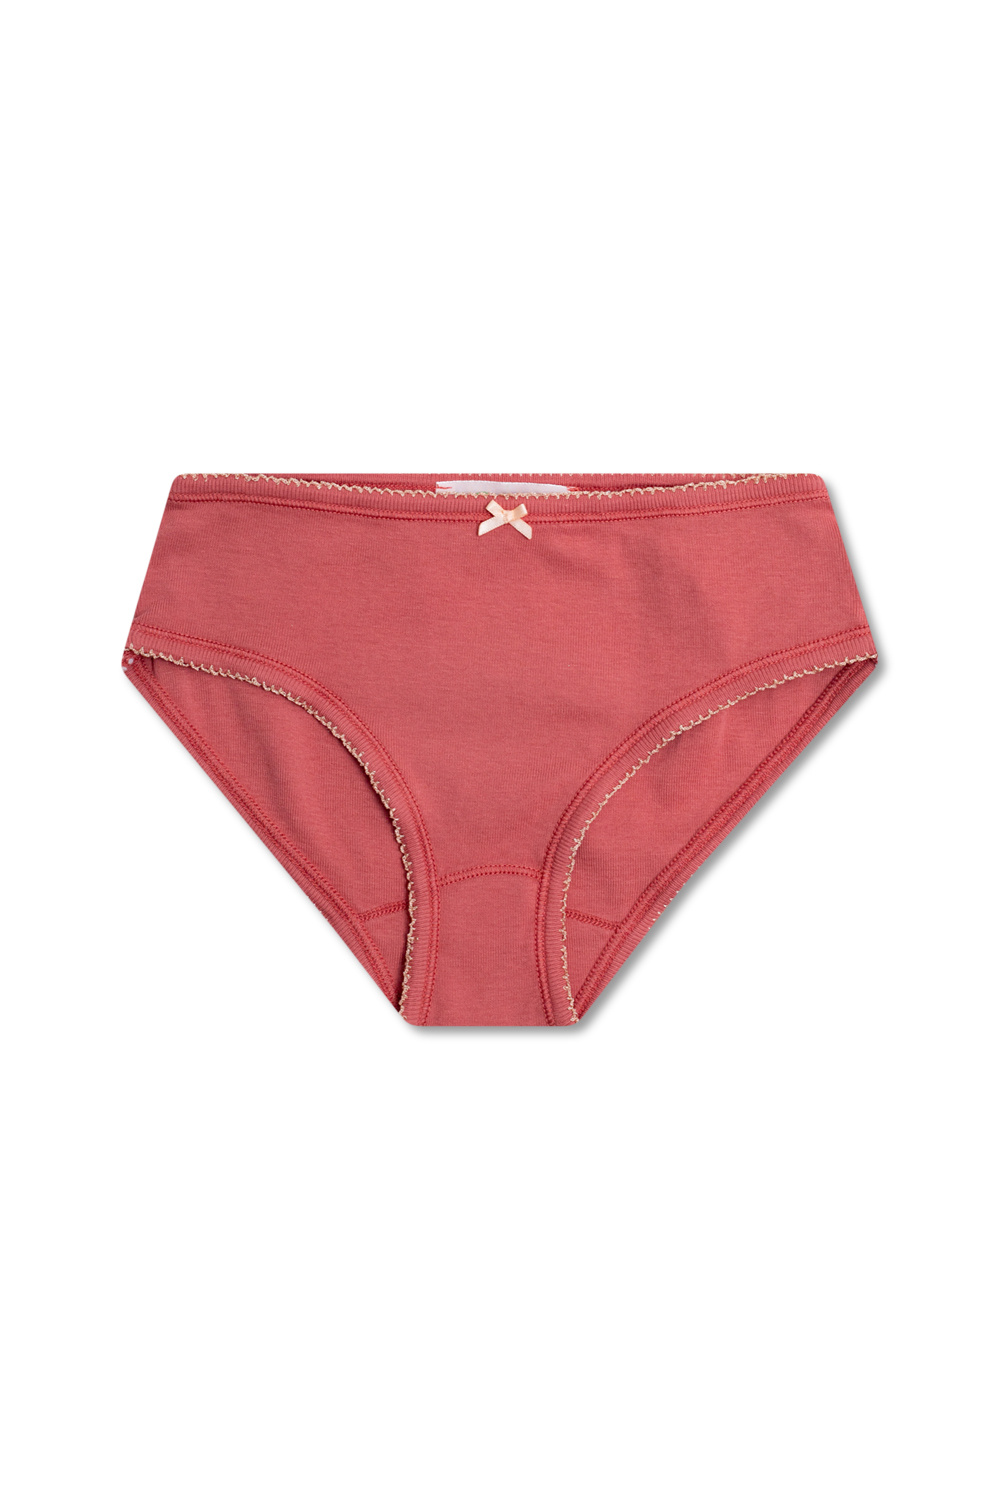 Bonpoint  Knickers three-pack